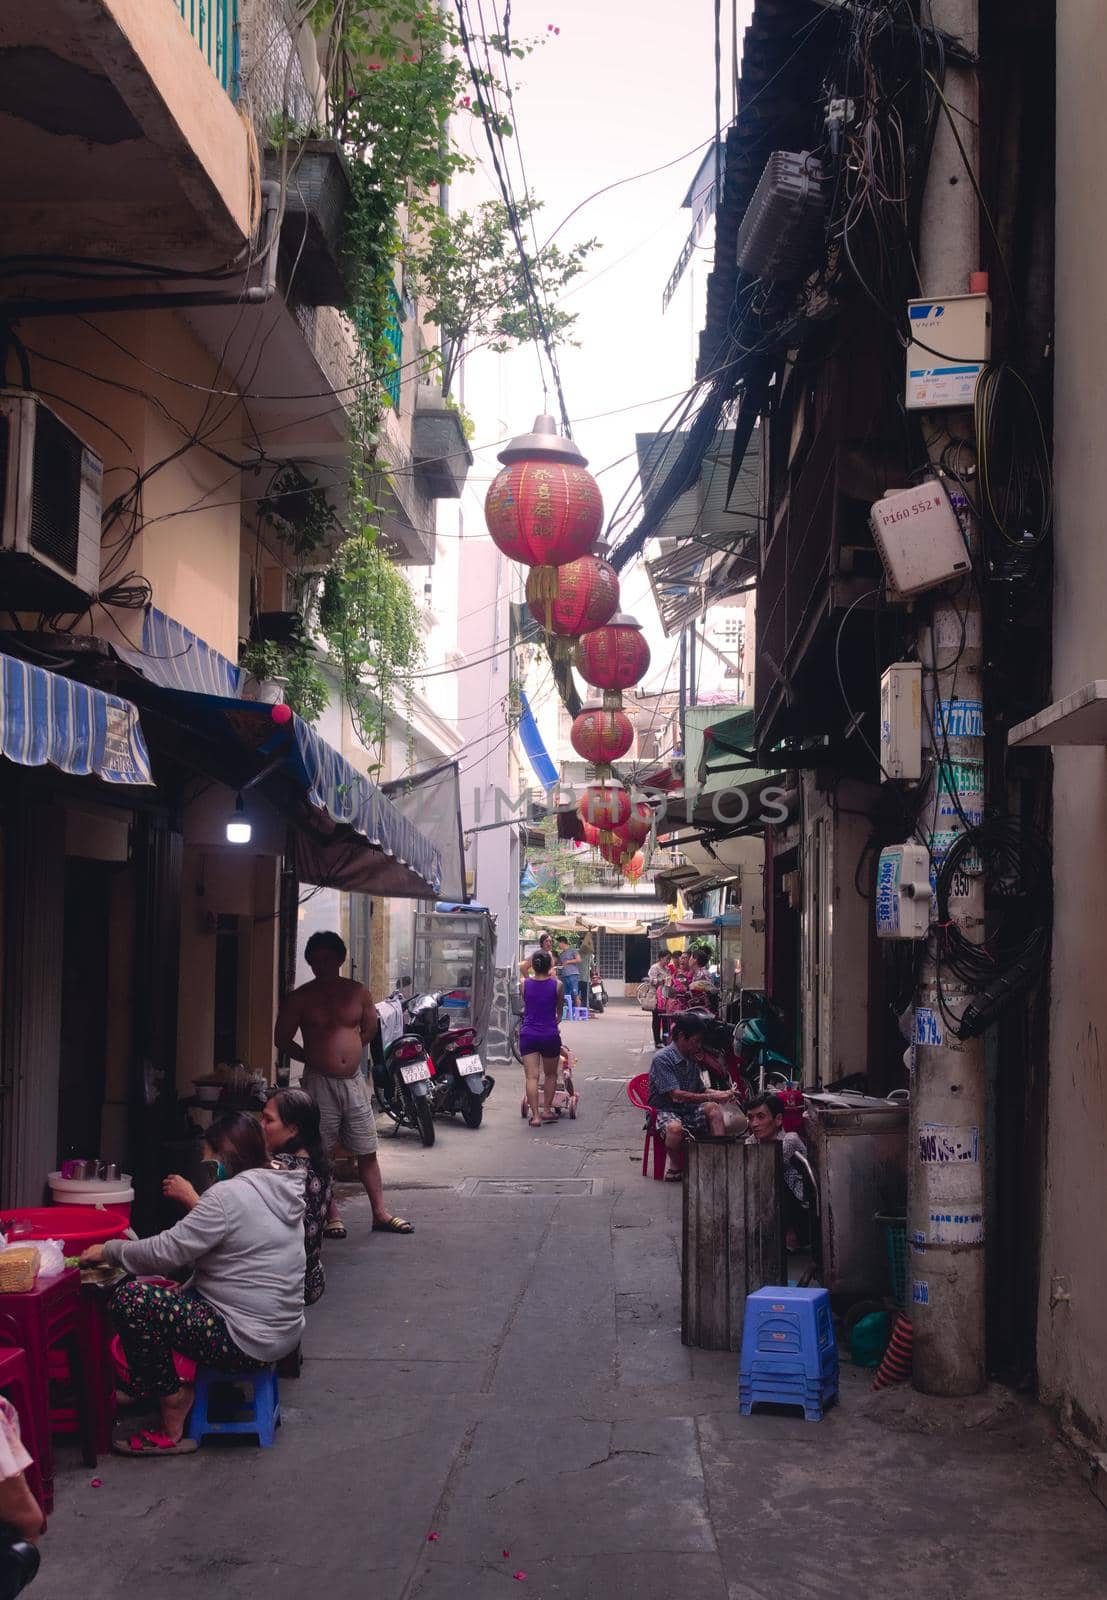 2019-11-10 / Ho Chi Minh City, Vietnam - Everyday life scene. Narrow back alley in a poor area of the city.